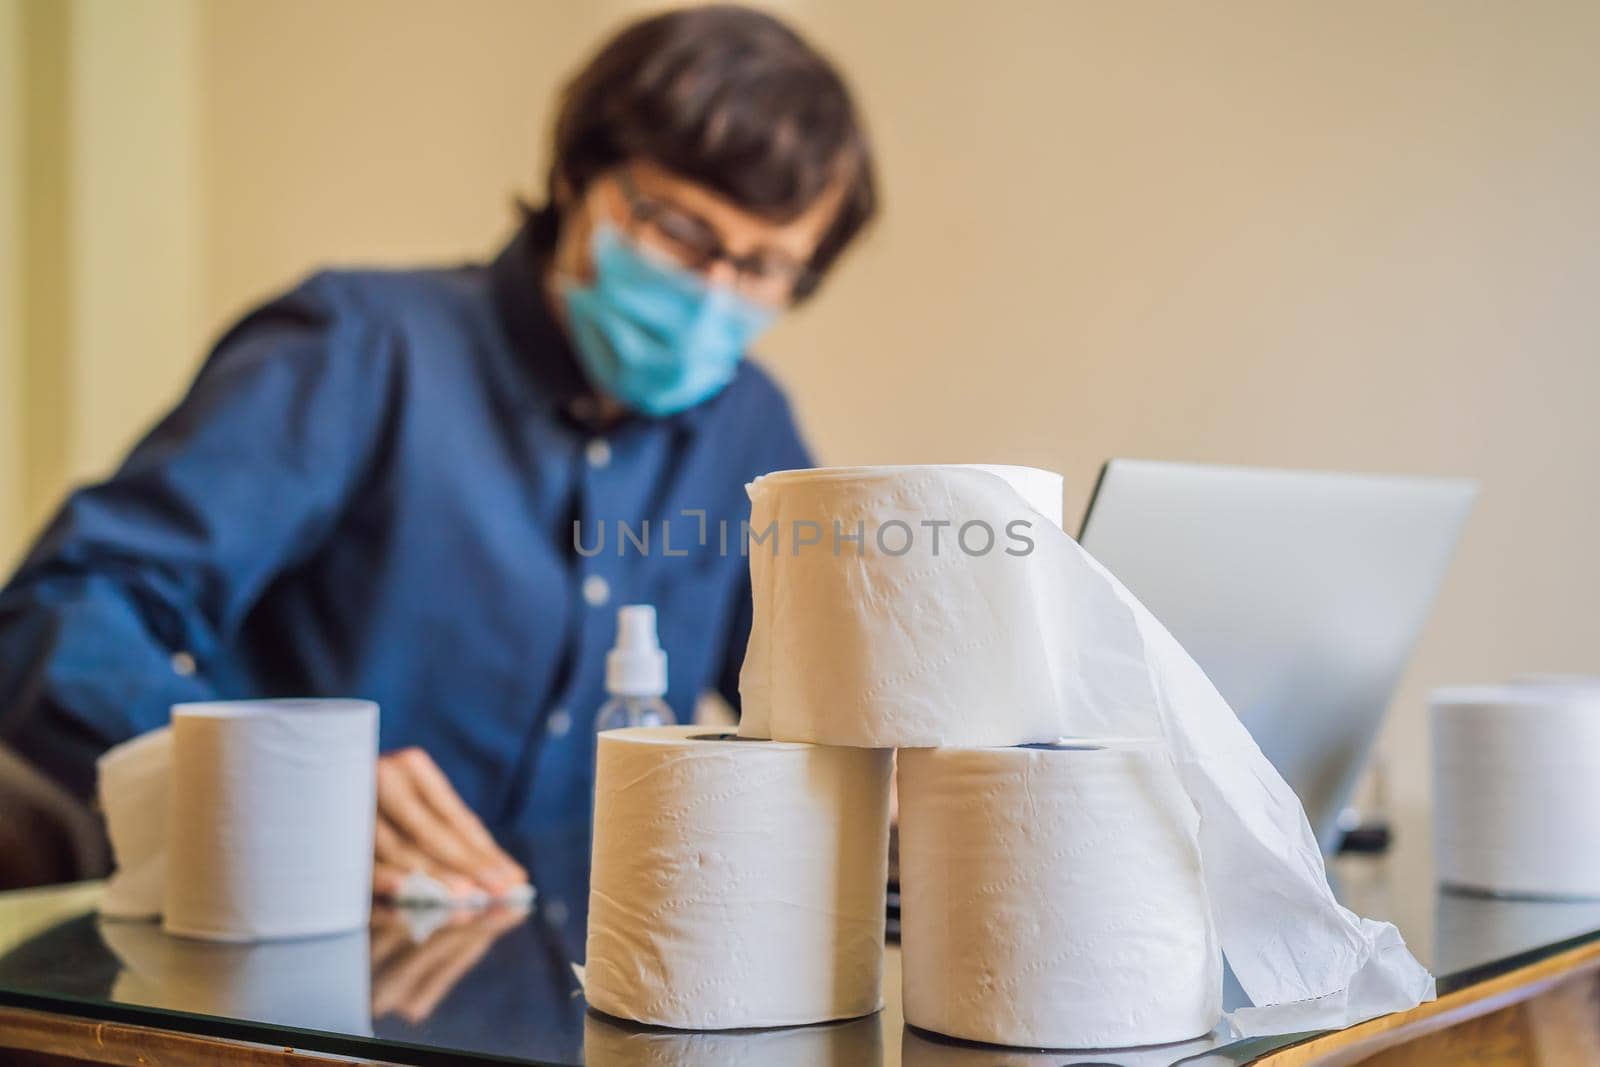 Coronavirus. Man working from home wearing protective mask. quarantine for coronavirus wearing protective mask. Working from home. Cleaning with sanitizer gel. Bought a lot of toilet paper.